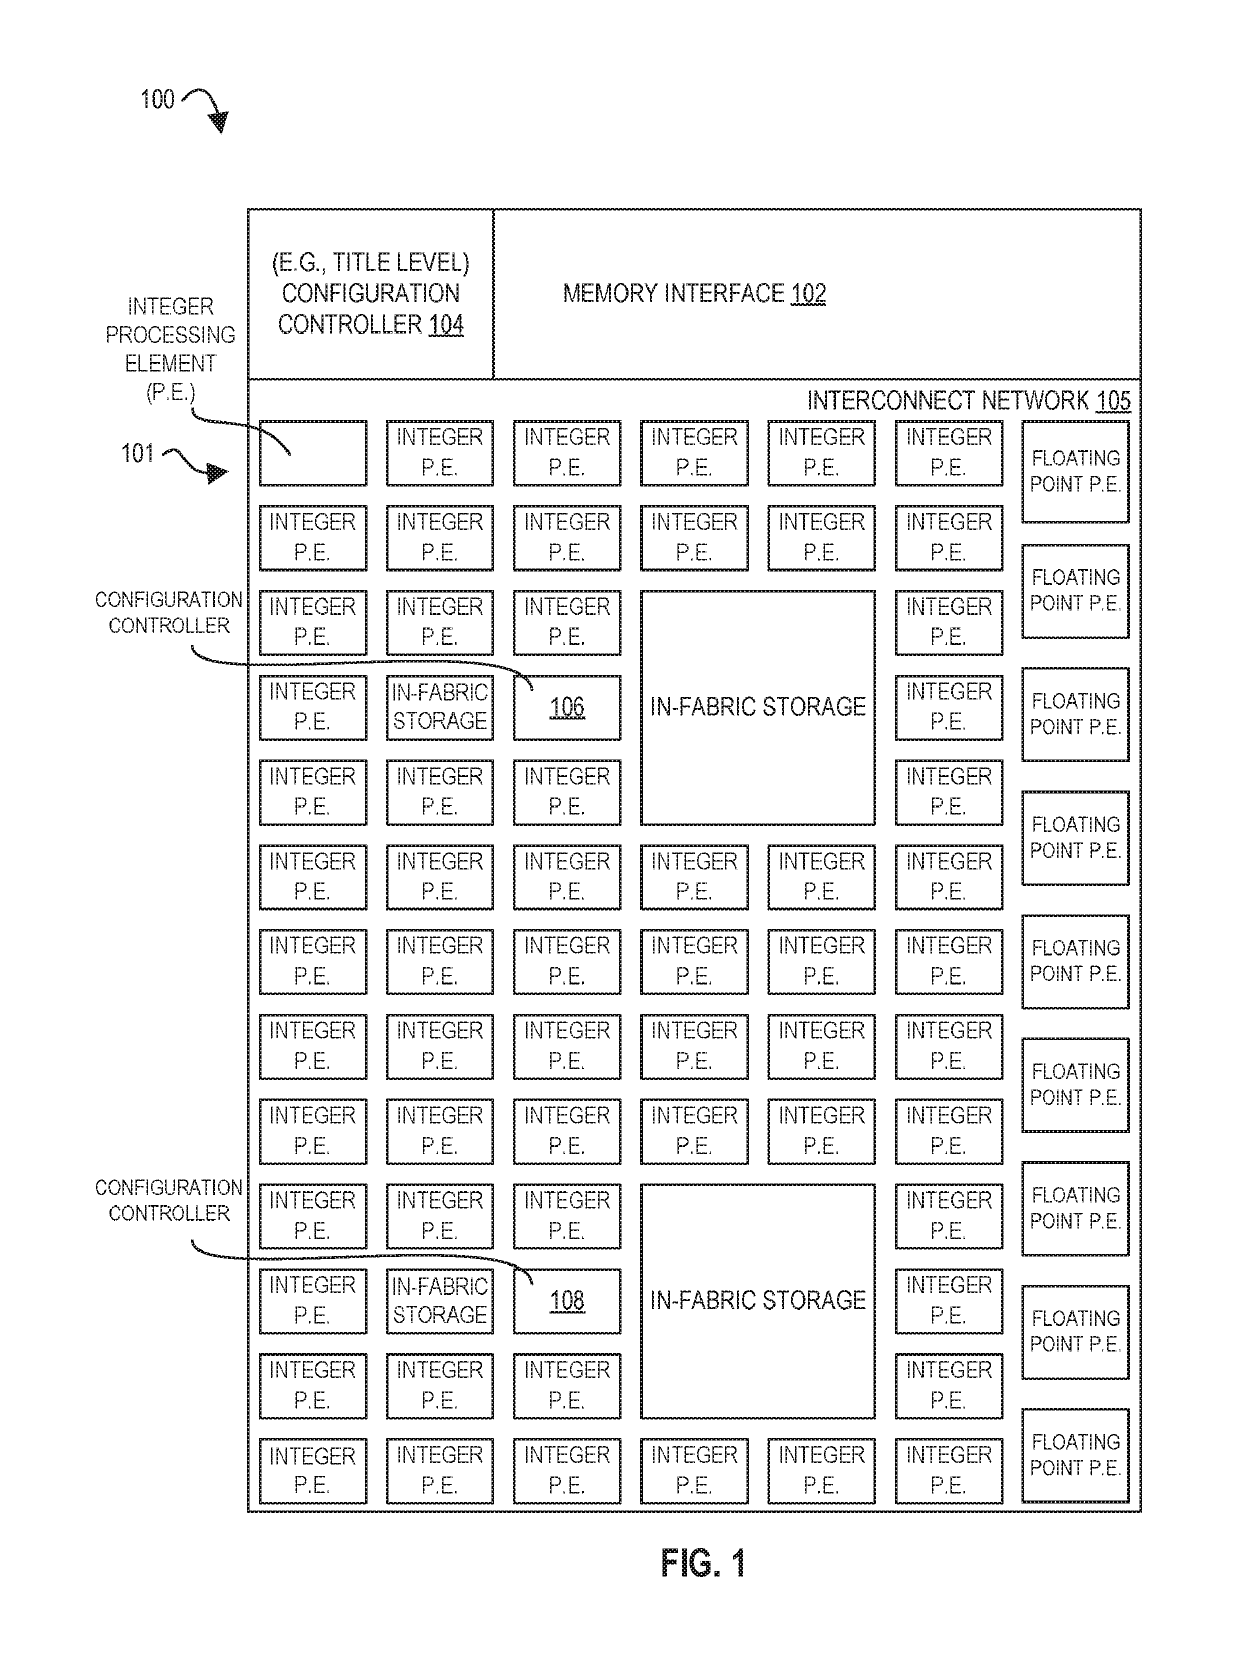 Processors and methods for privileged configuration in a spatial array